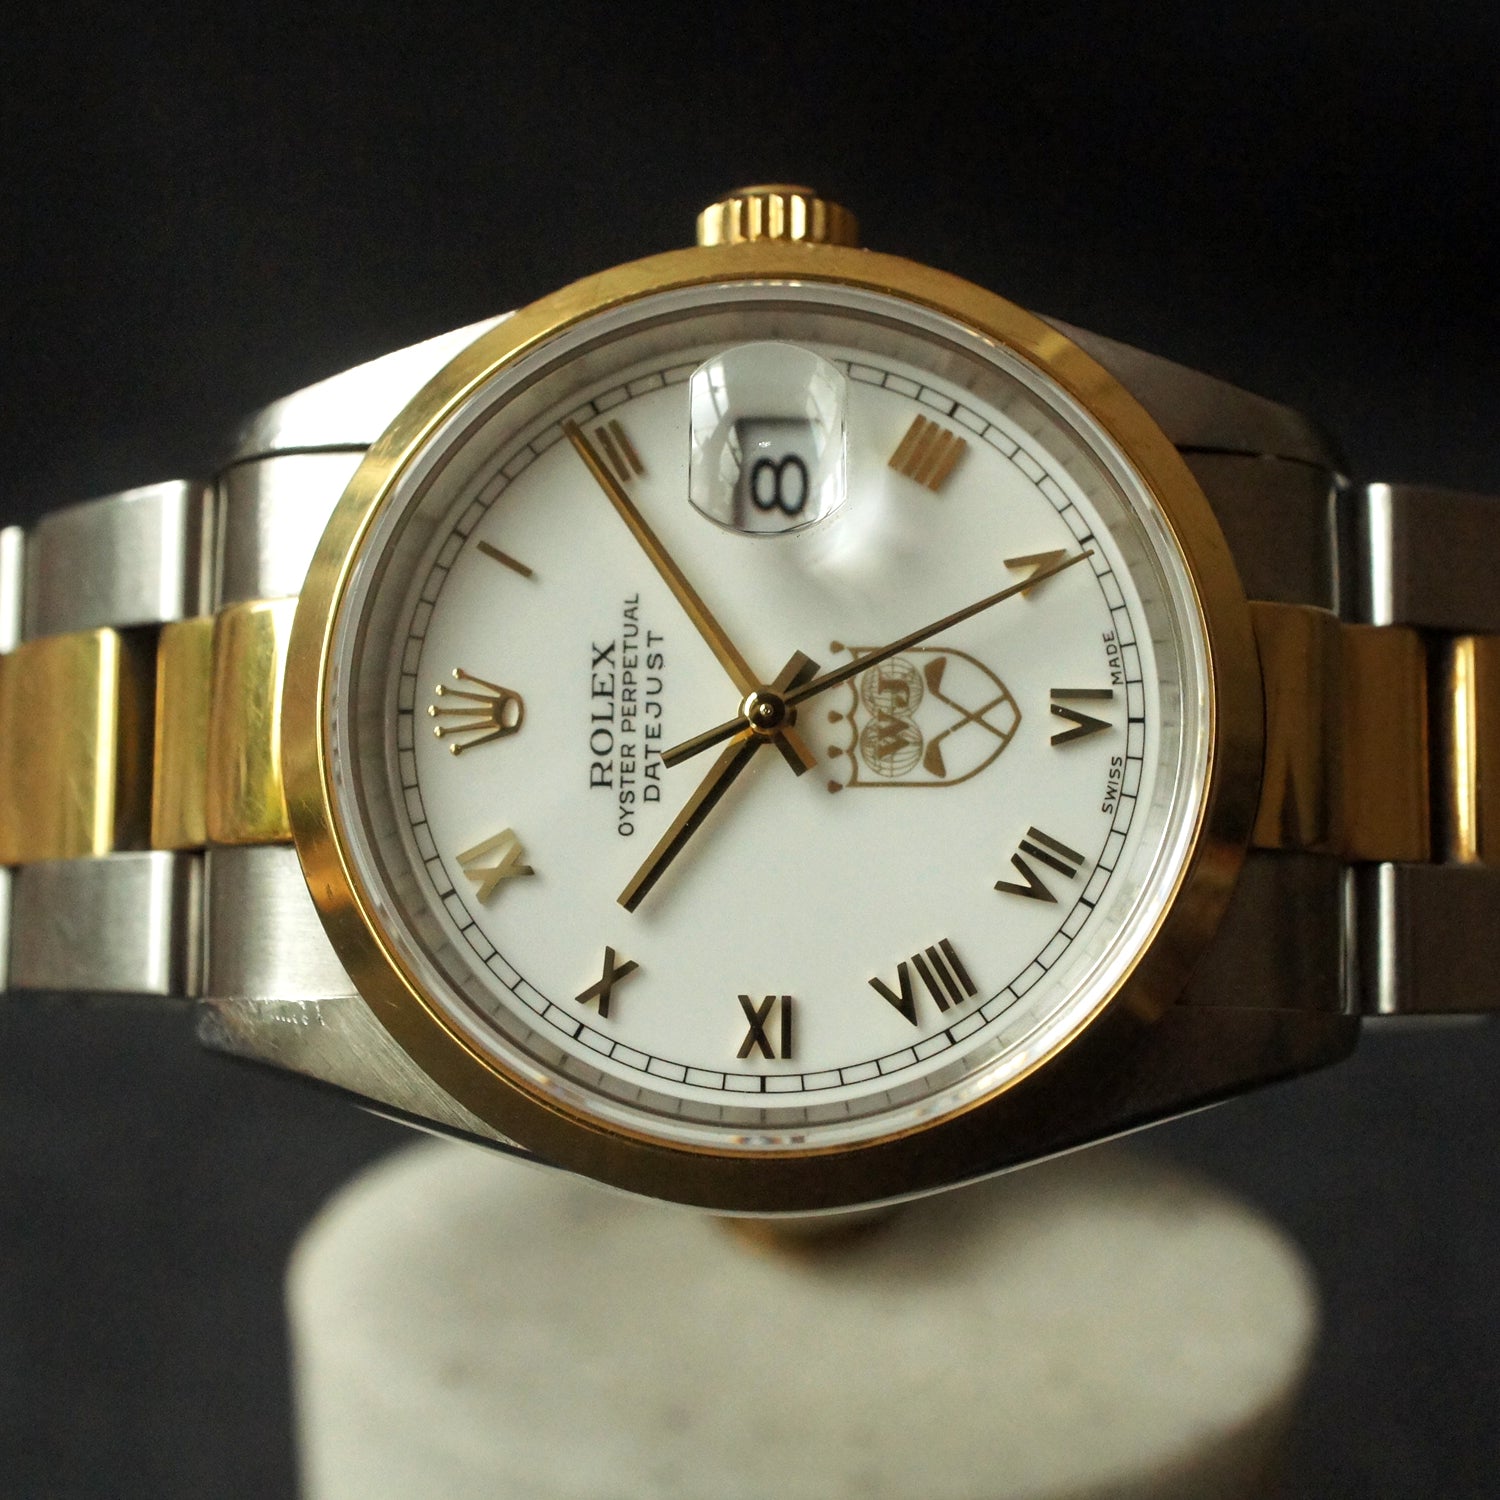 Rolex Datejust Price: Oyster Perpetual Datejust Price Lists